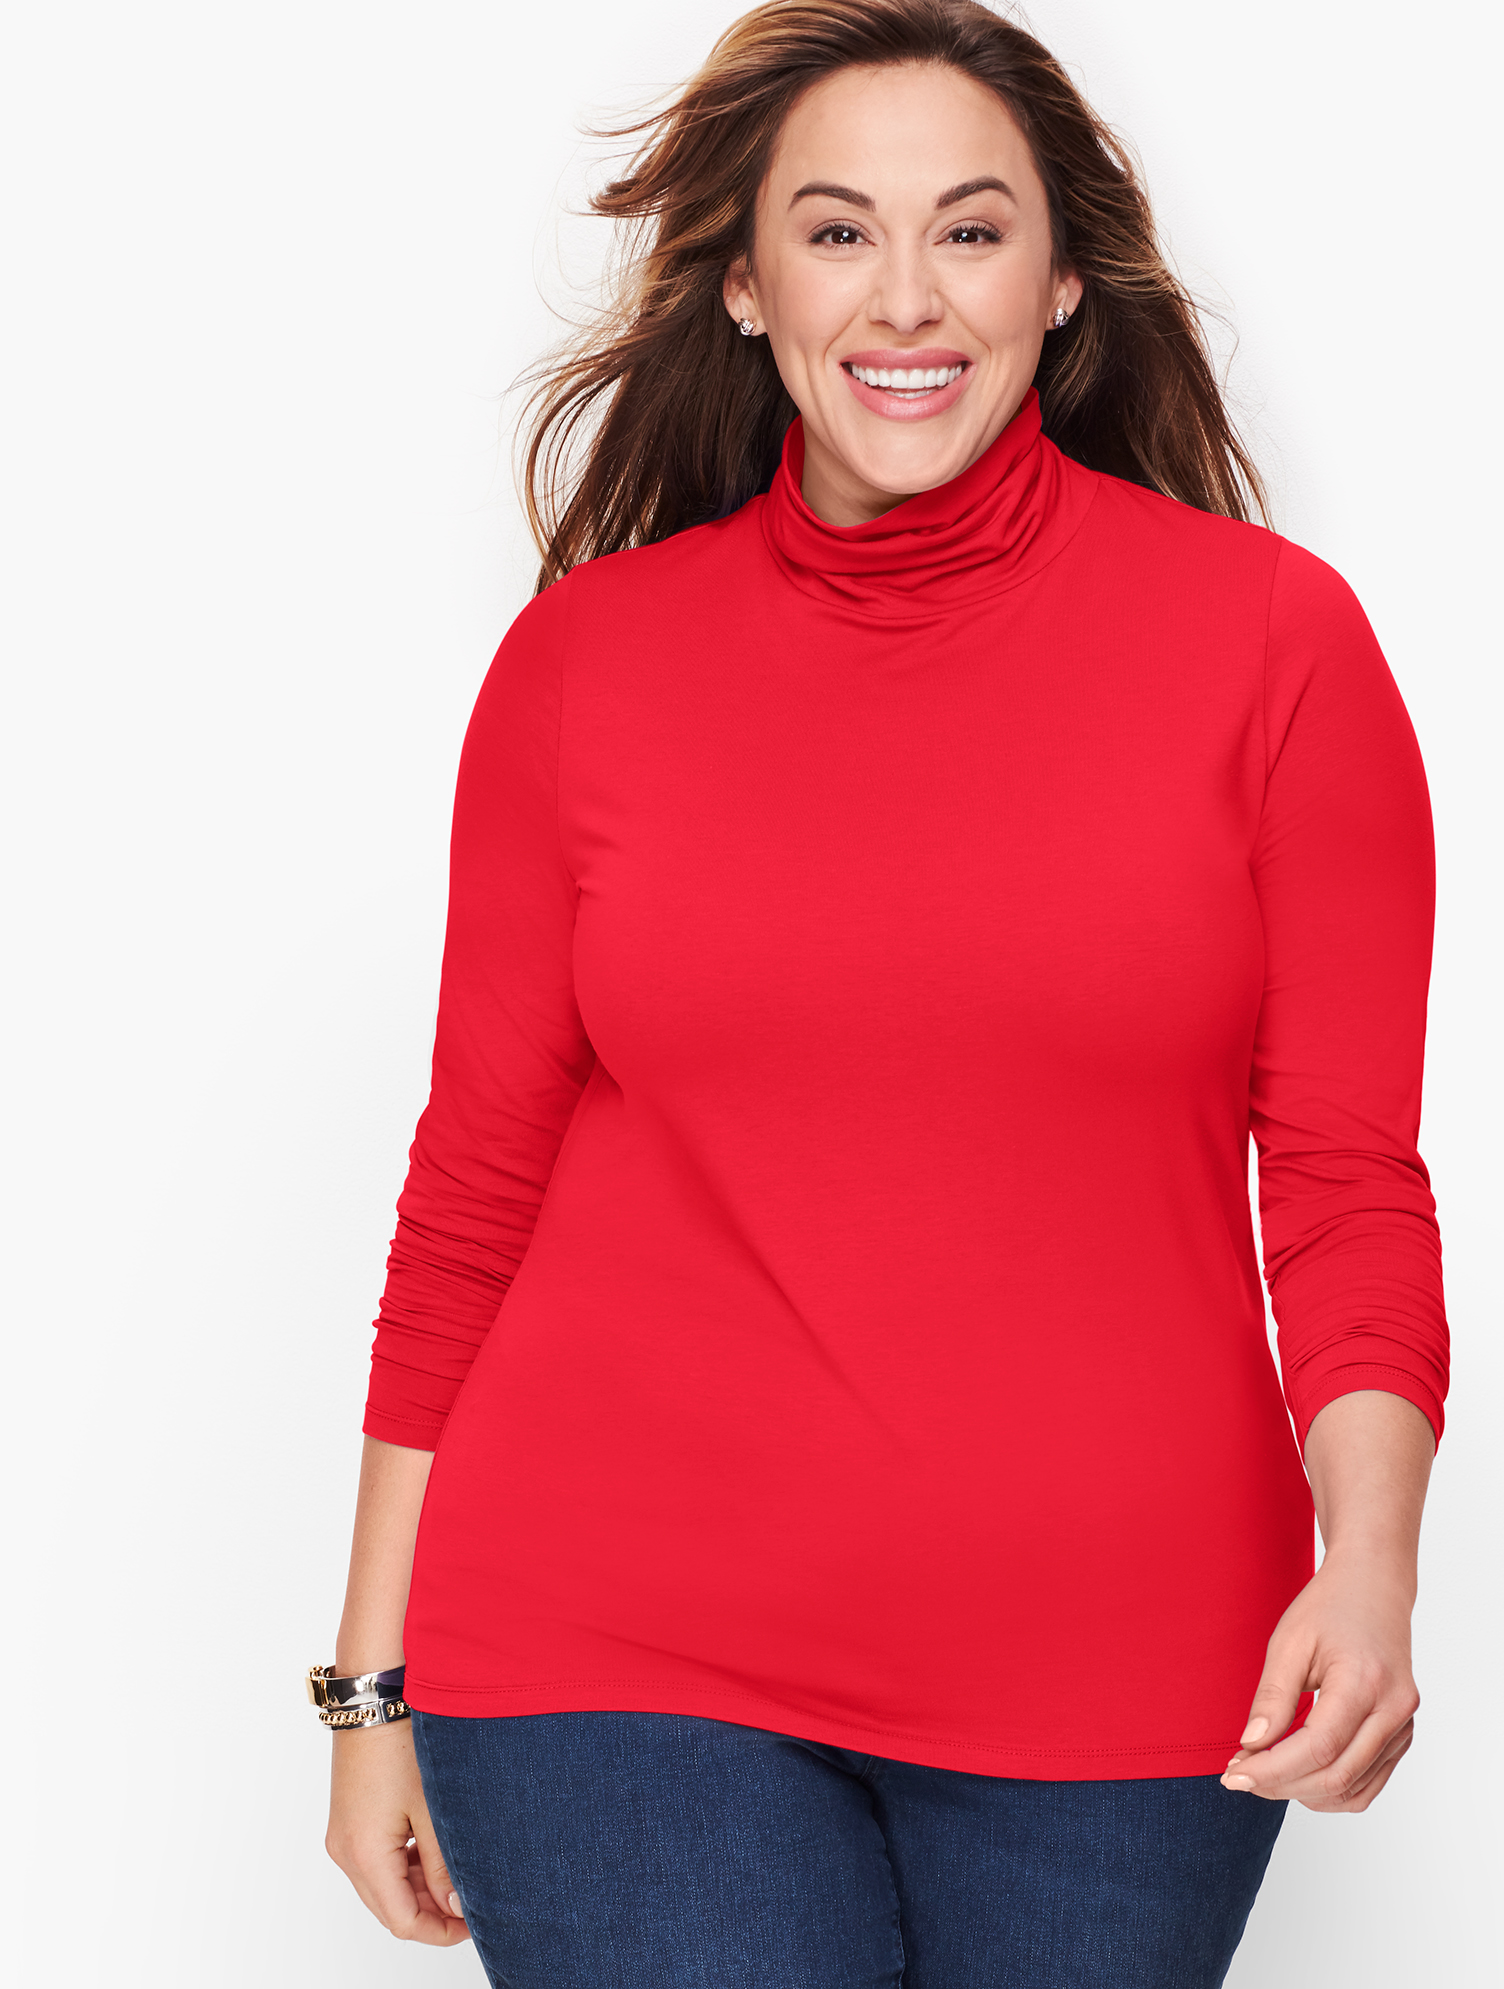 Talbots Long-sleeve Turtleneck Top - Red - 2x